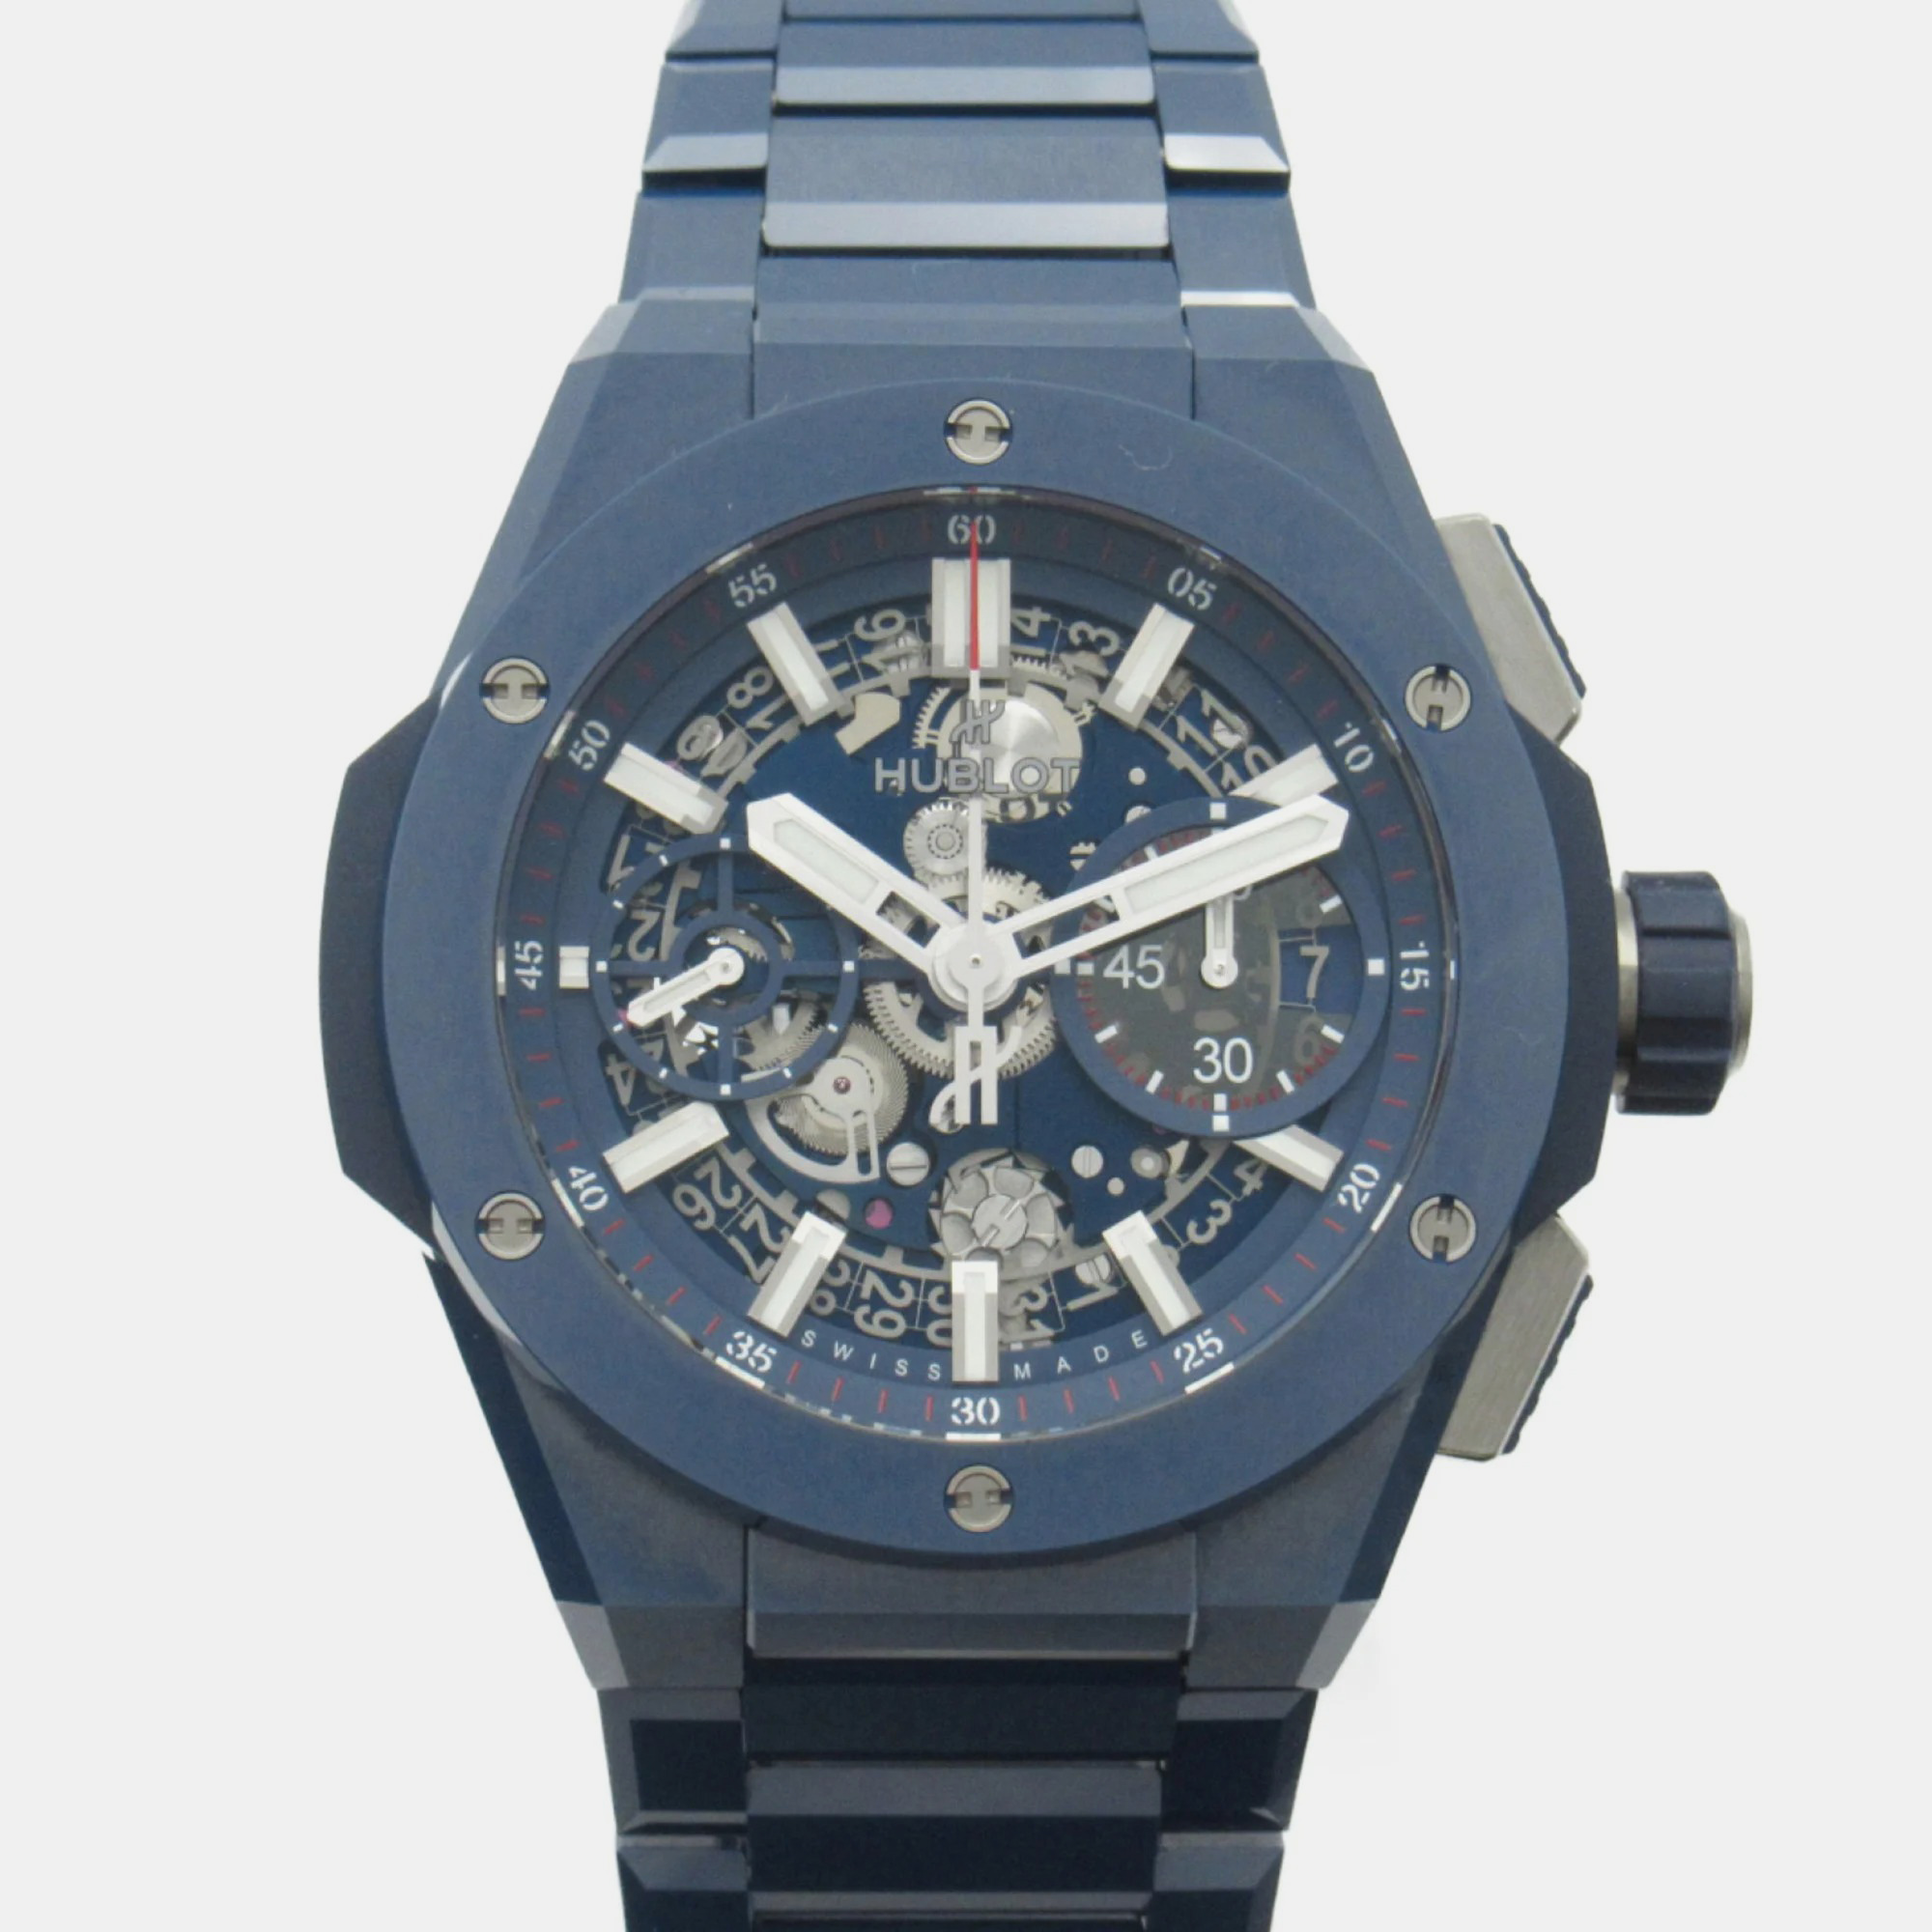 The charm of a finely crafted wristwatch accompanies the wearer through the years and to any occasion they have a date for. It is this charm infused with timeless luxury that makes this Hublot wristwatch such an incredible pick.